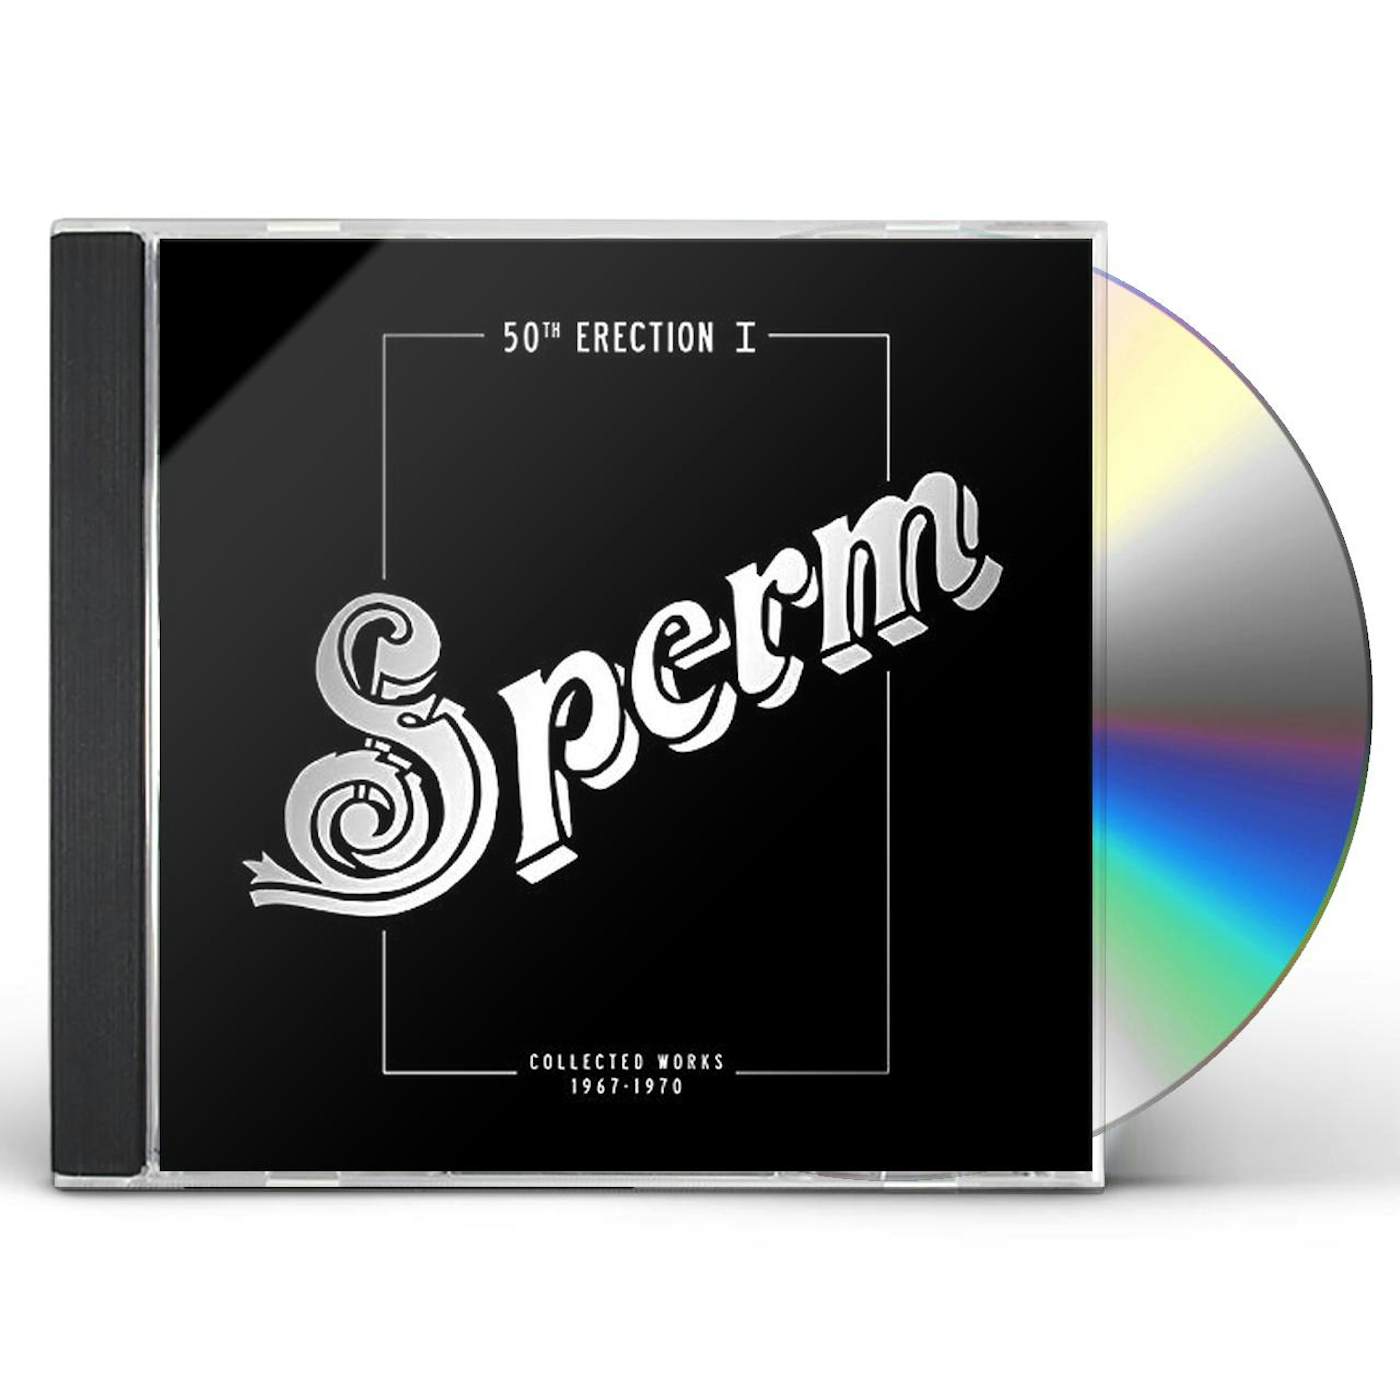 Sperm 50TH ERECTION I: COLLECTED WORKS 1967-1970 CD